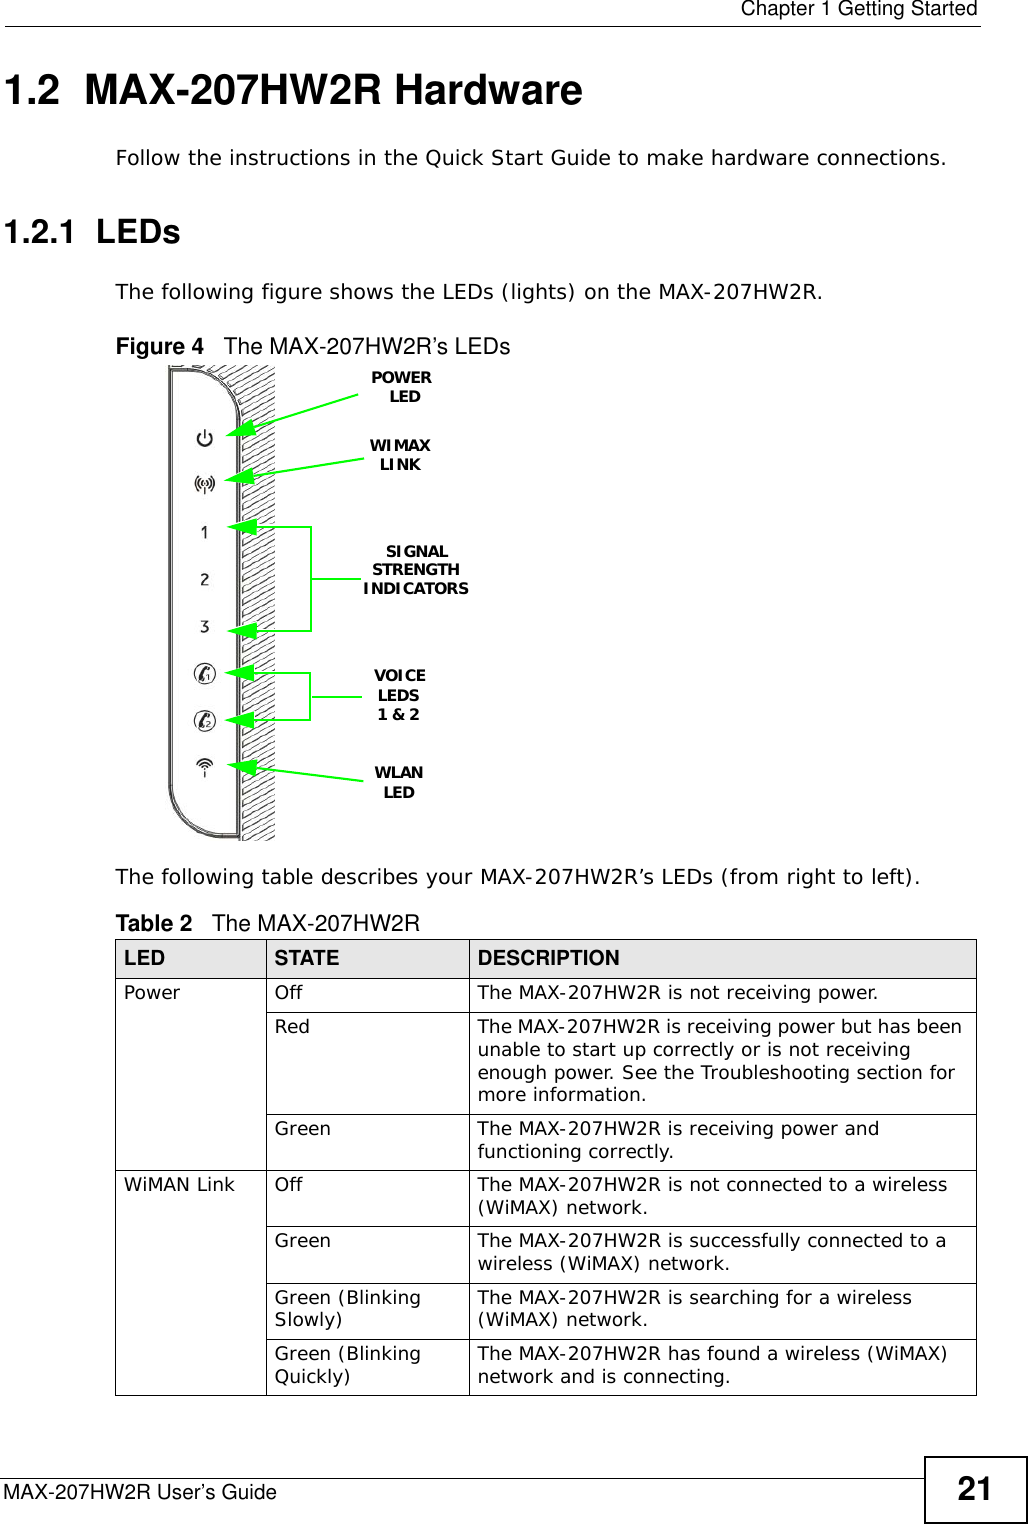  Chapter 1 Getting StartedMAX-207HW2R User’s Guide 211.2  MAX-207HW2R HardwareFollow the instructions in the Quick Start Guide to make hardware connections.1.2.1  LEDsThe following figure shows the LEDs (lights) on the MAX-207HW2R.Figure 4   The MAX-207HW2R’s LEDsThe following table describes your MAX-207HW2R’s LEDs (from right to left).       Table 2   The MAX-207HW2RLED STATE DESCRIPTIONPower Off The MAX-207HW2R is not receiving power.Red The MAX-207HW2R is receiving power but has been unable to start up correctly or is not receiving enough power. See the Troubleshooting section for more information.Green The MAX-207HW2R is receiving power and functioning correctly.WiMAN Link Off The MAX-207HW2R is not connected to a wireless (WiMAX) network.Green The MAX-207HW2R is successfully connected to a wireless (WiMAX) network.Green (Blinking Slowly) The MAX-207HW2R is searching for a wireless (WiMAX) network.Green (Blinking Quickly) The MAX-207HW2R has found a wireless (WiMAX) network and is connecting.WLANLEDSTRENGTHINDICATORSVOICELEDSPOWERLED1 &amp; 2SIGNALWIMAXLINK